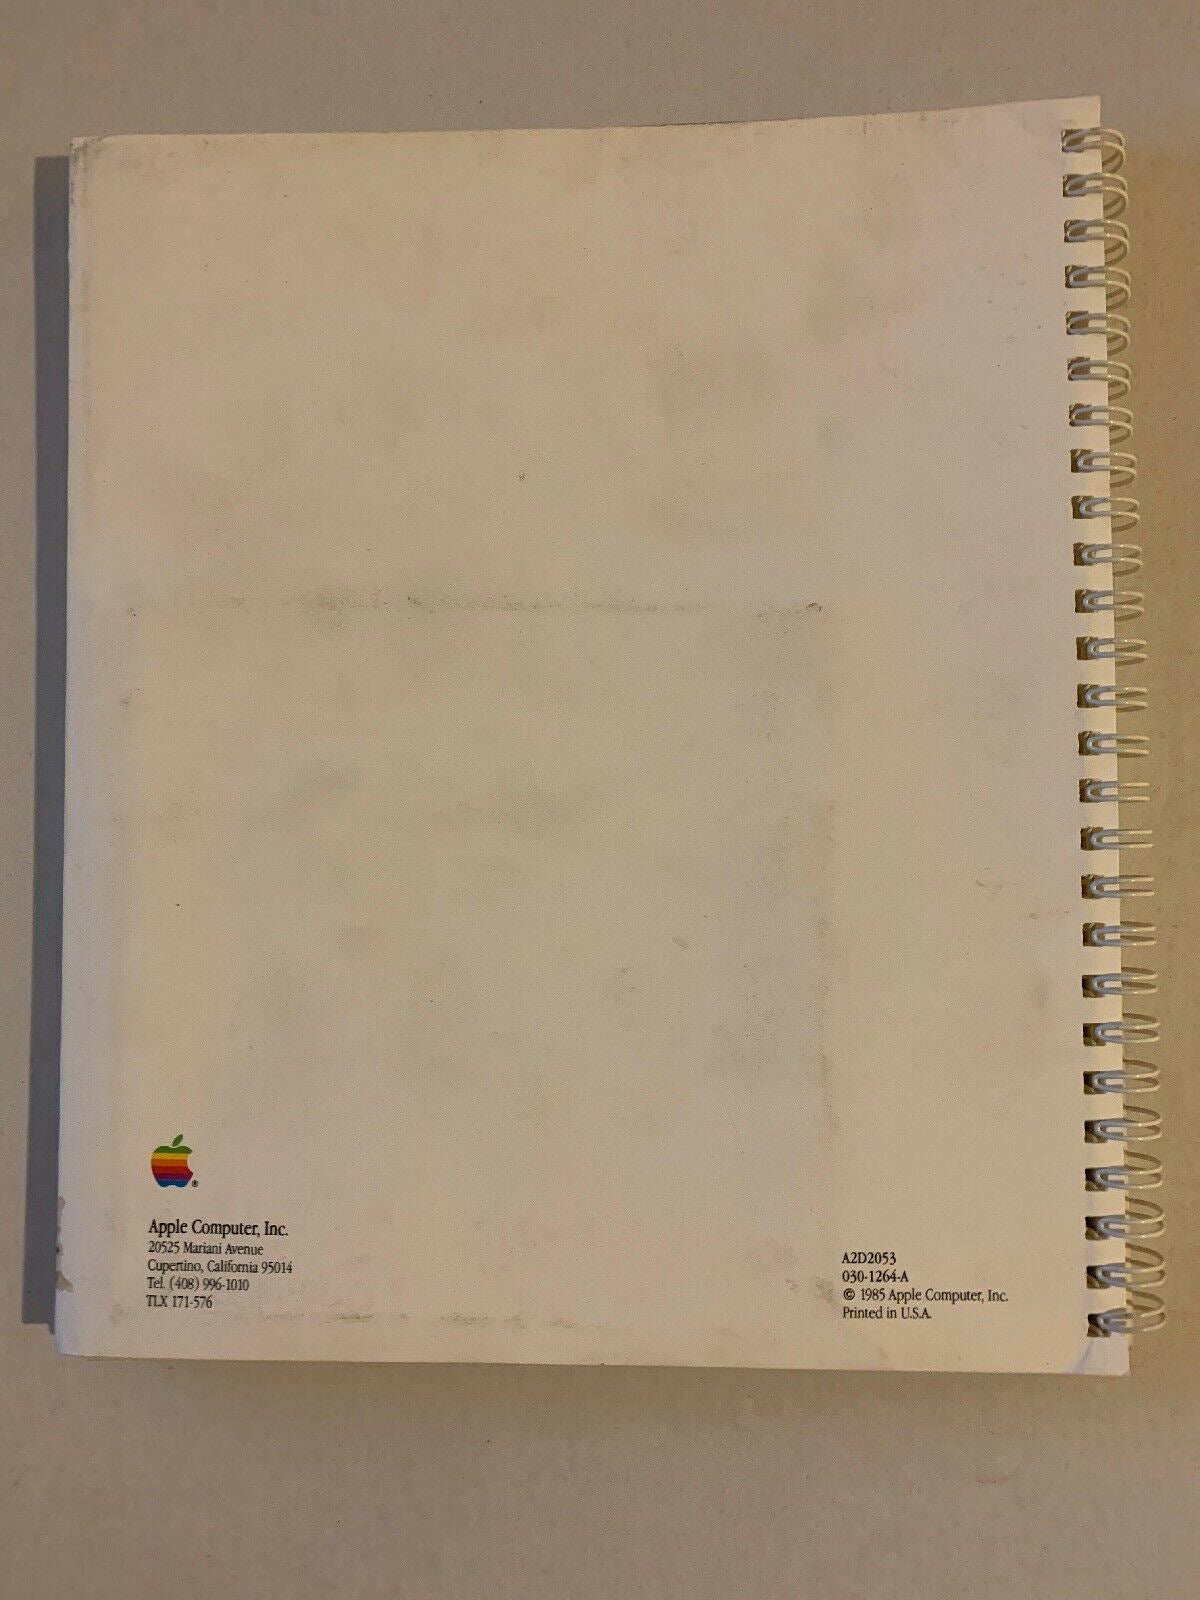 Apple II Utilities Guide For Apple II System Utilities And ProDOS Users Disk